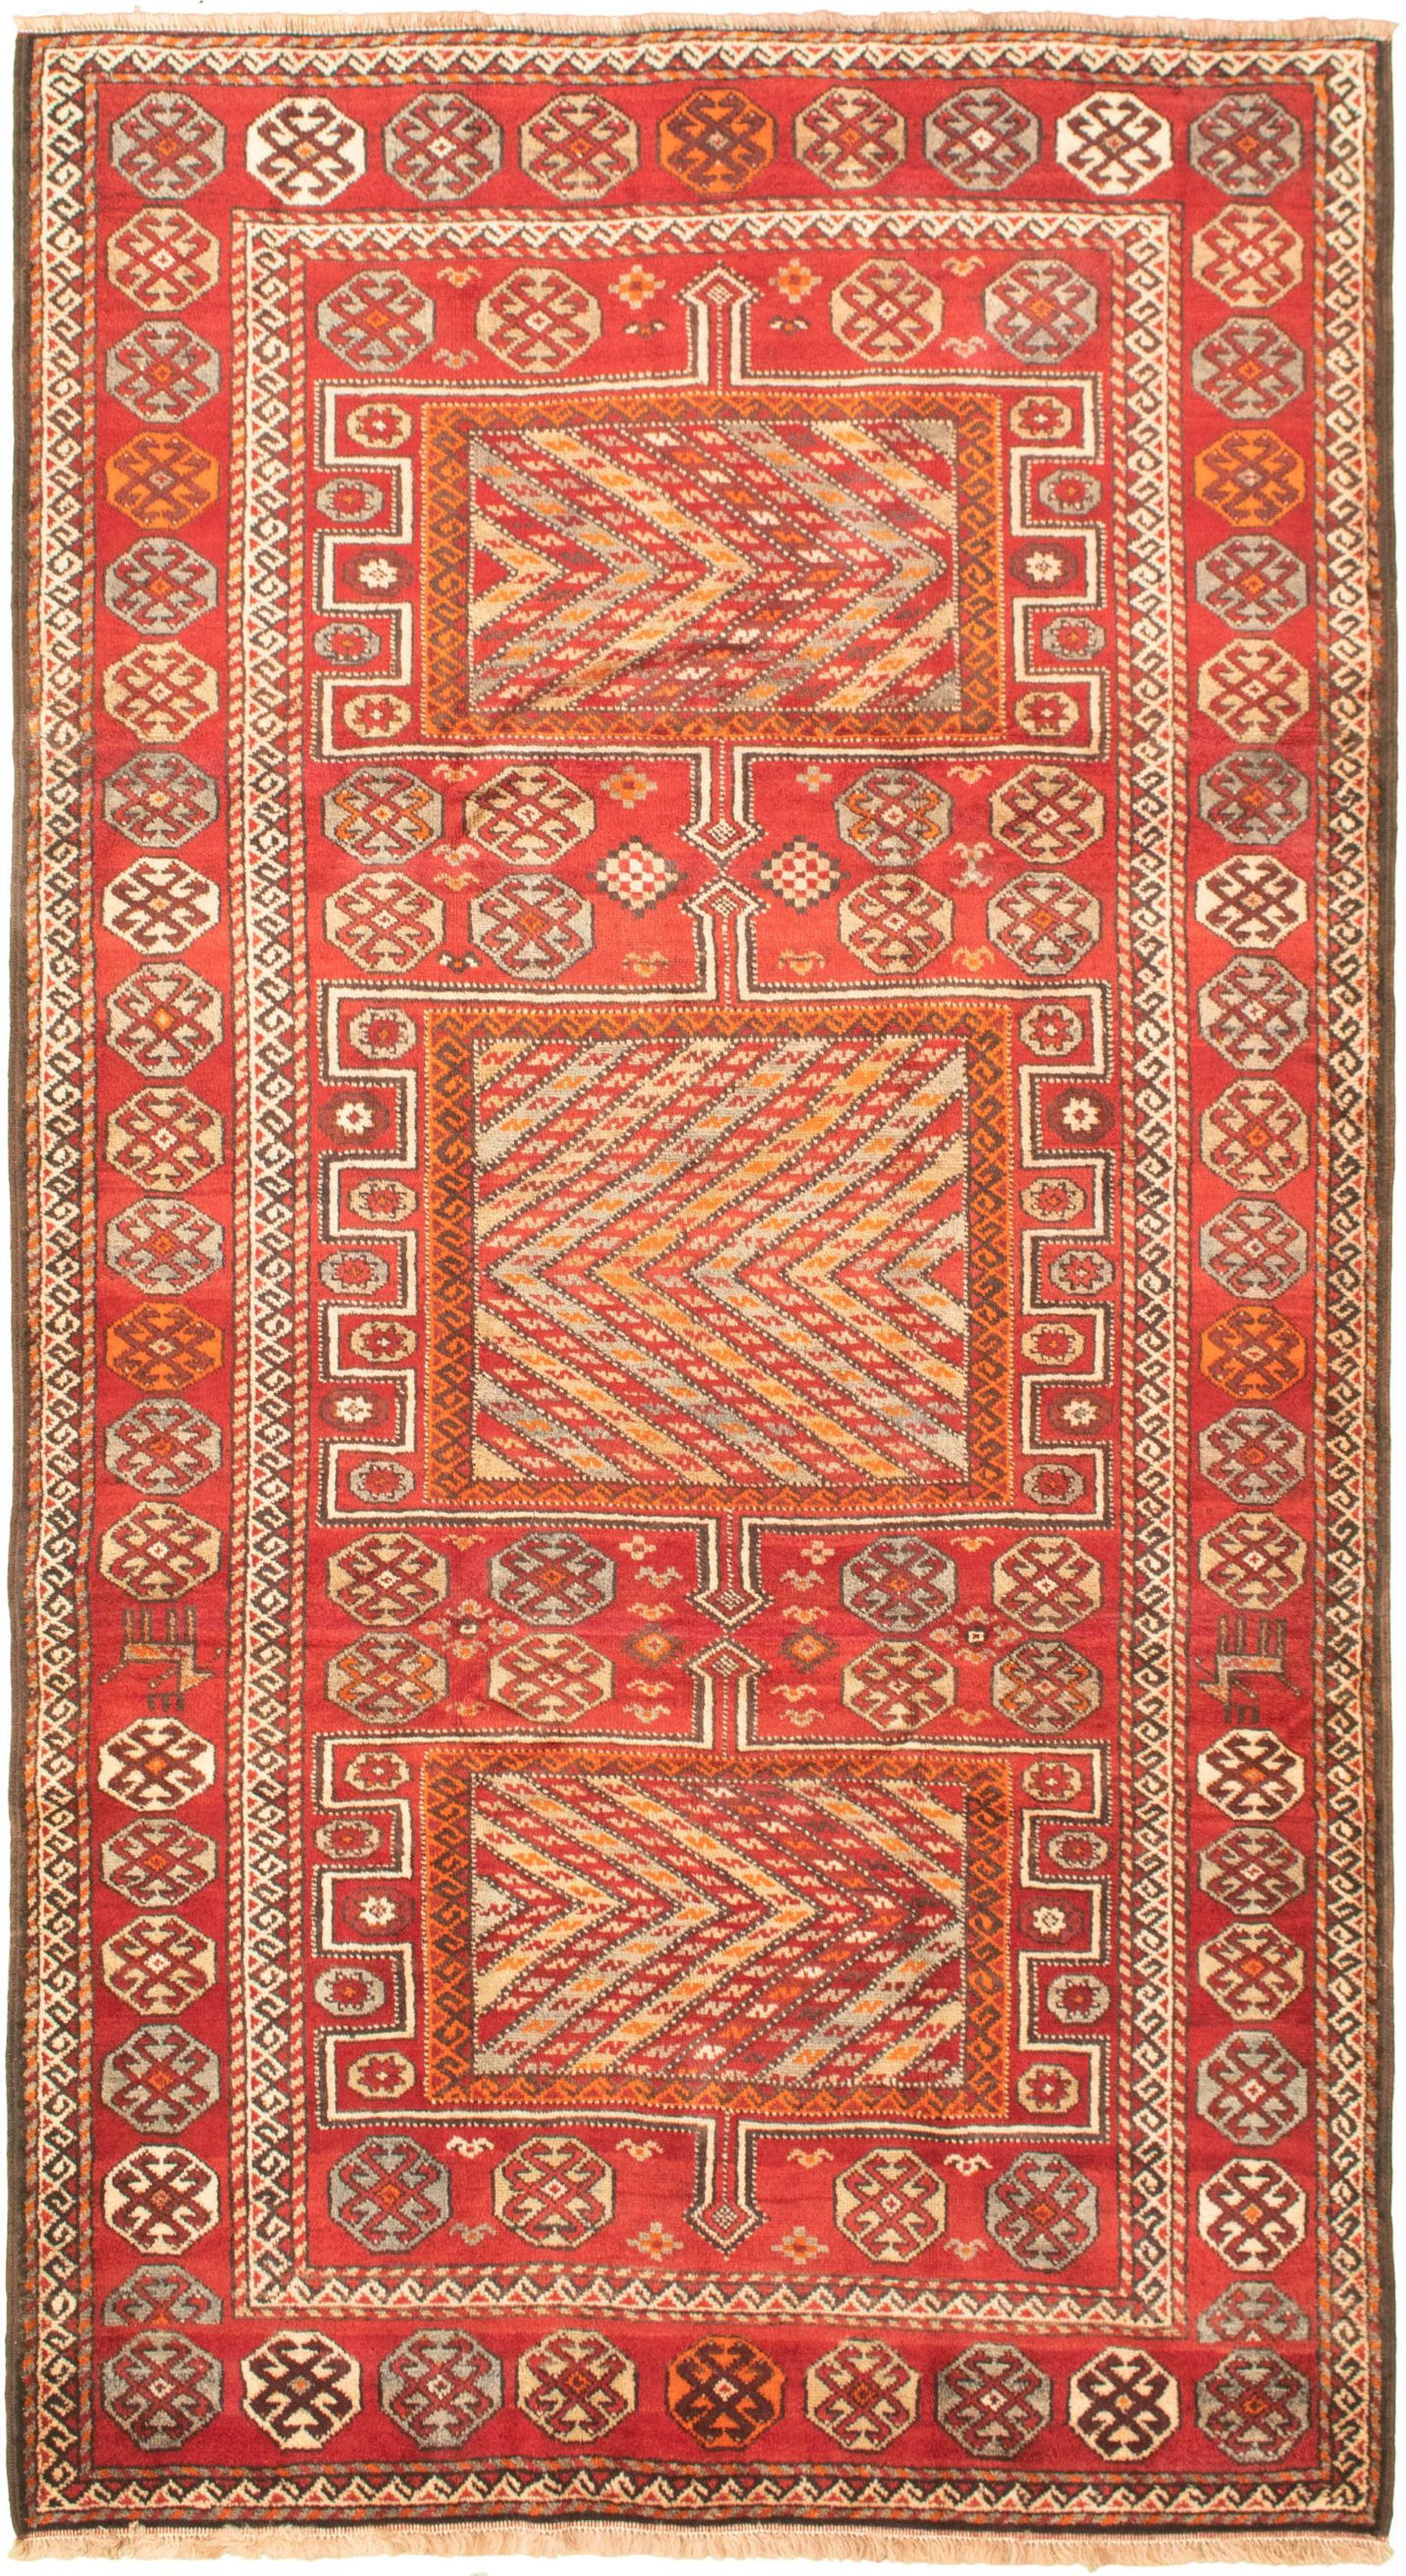 Hand-knotted Authentic Turkish Red Wool Rug 5'2" x 9'11" Size: 5'2" x 9'11"  